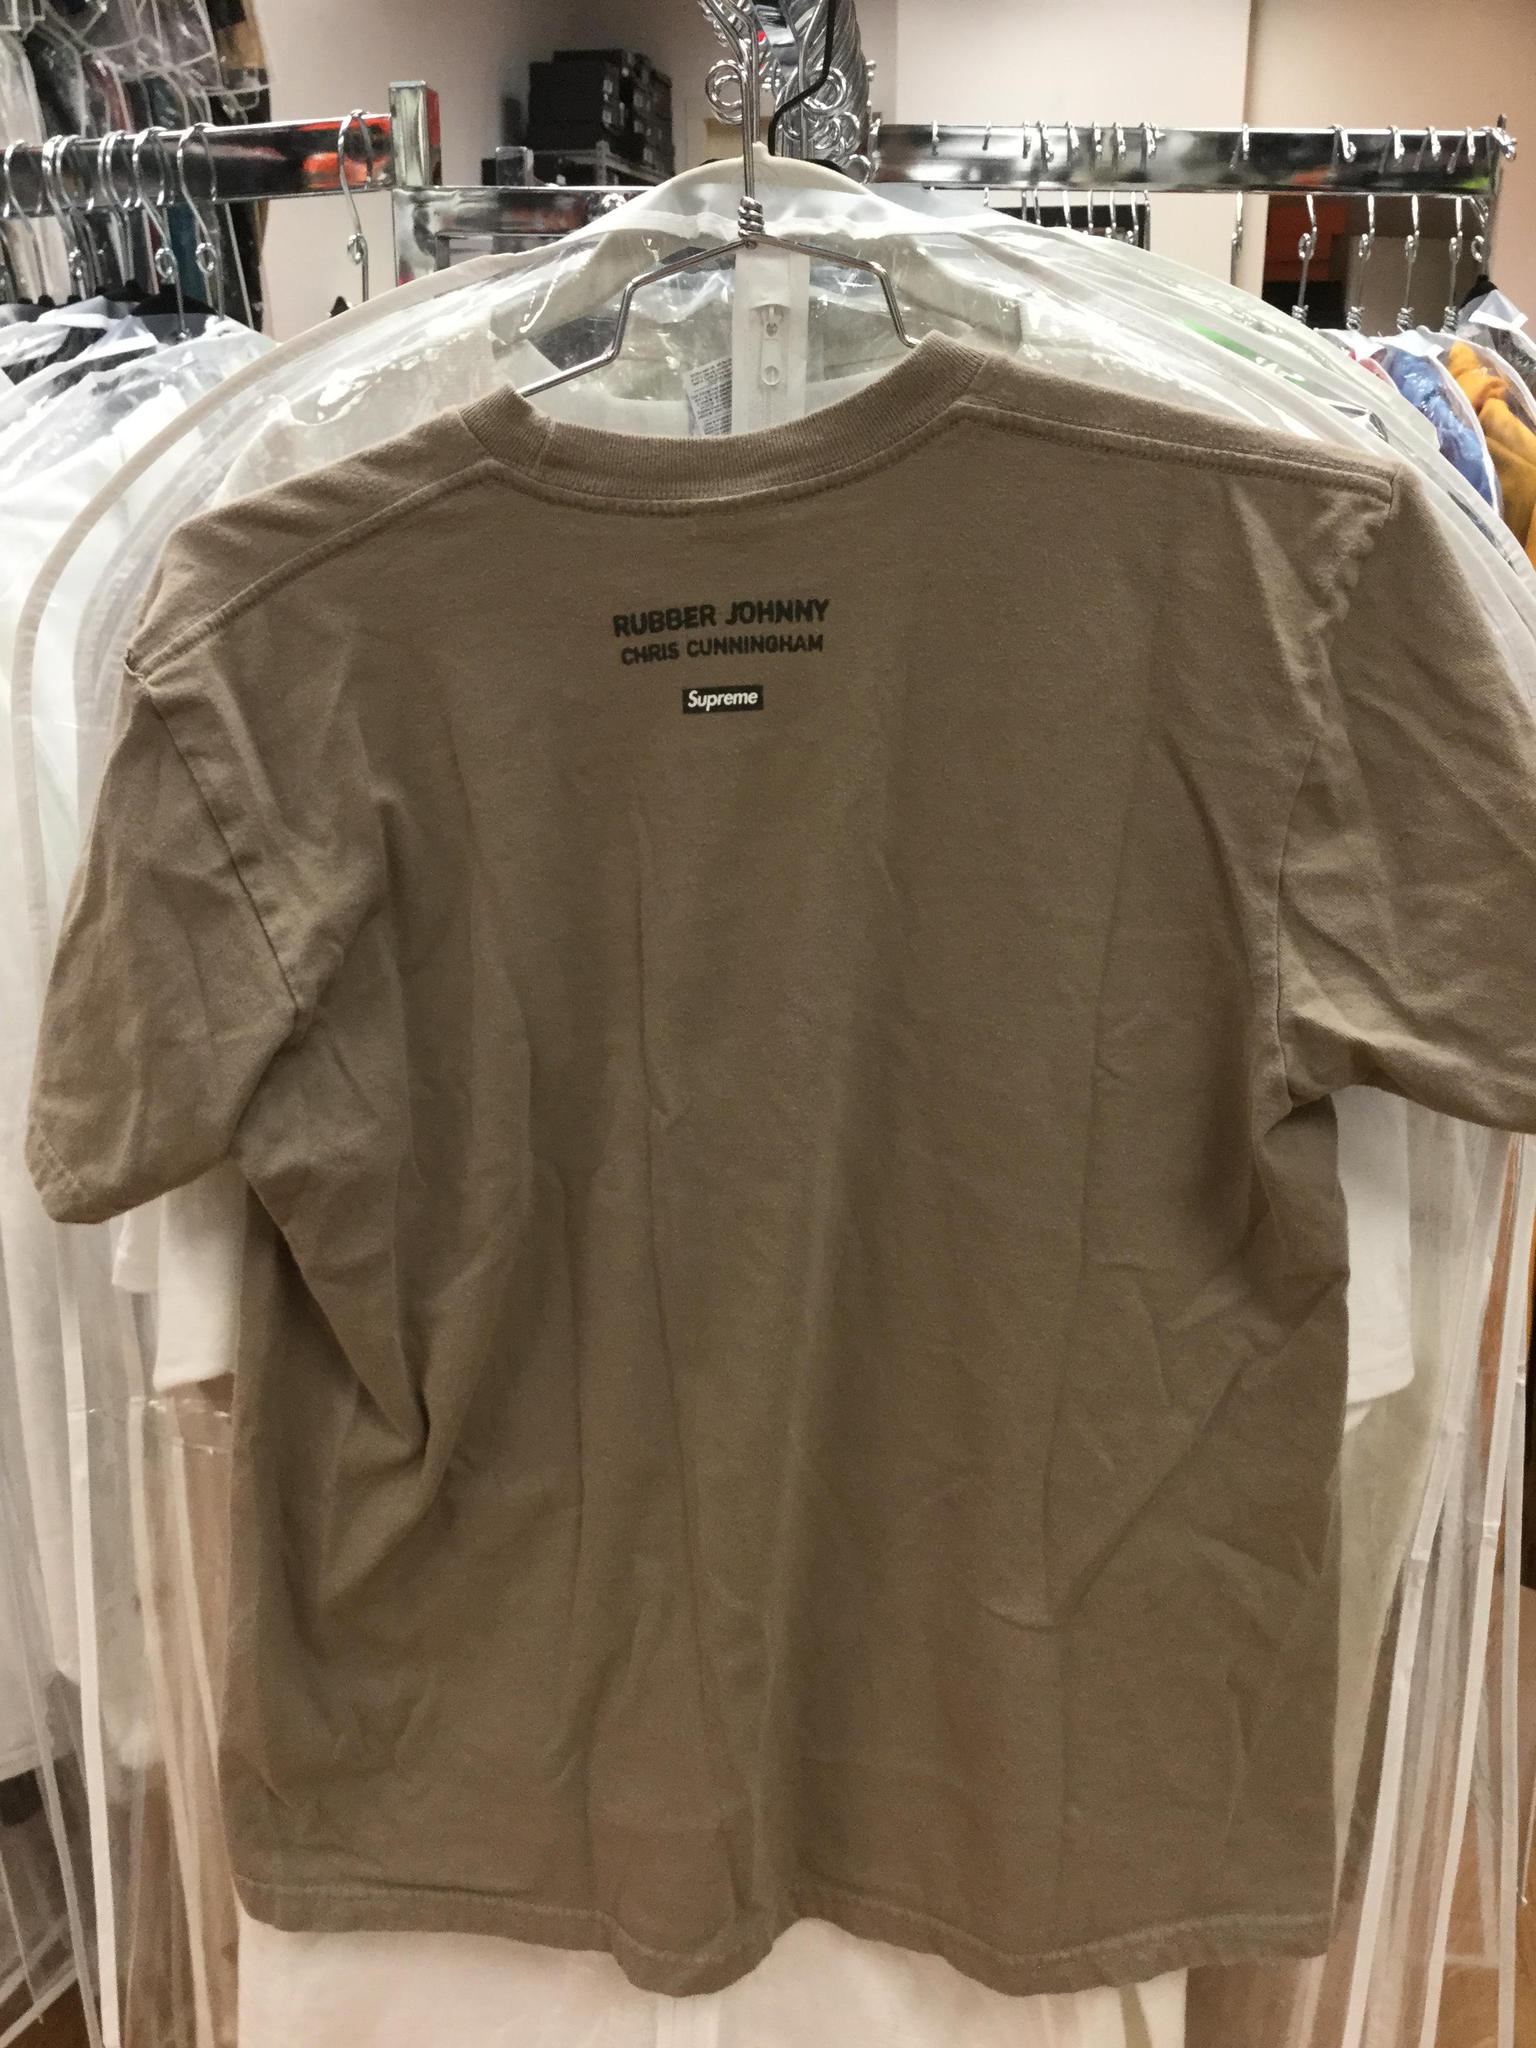 Vnds Supreme Chris Cunningham Rubber Johnny Tee Taupe - Free 